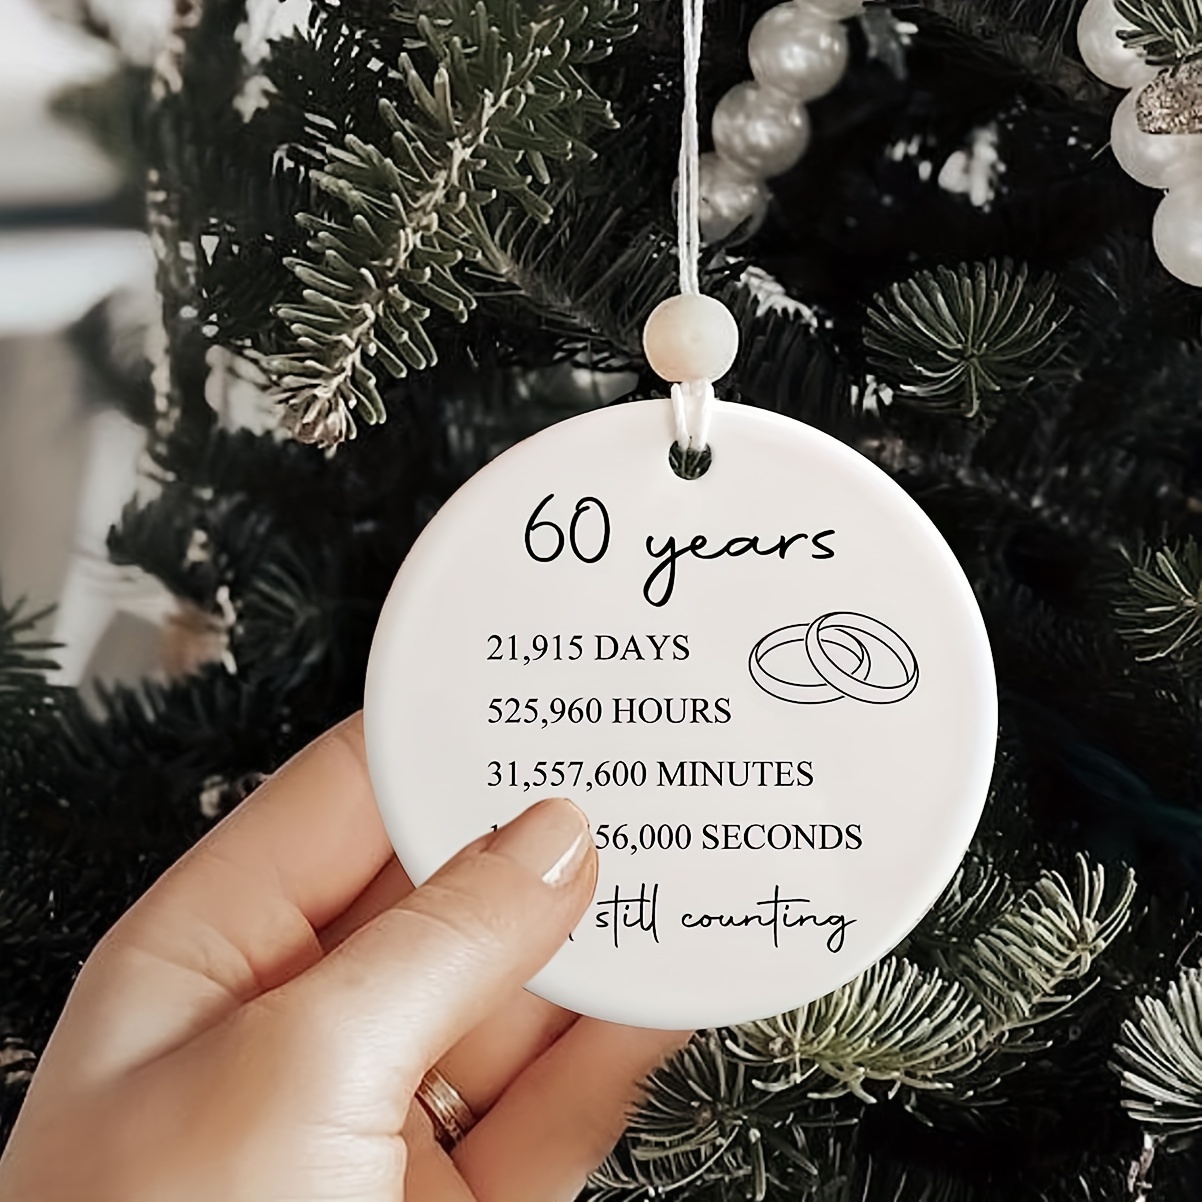 60th Wedding Anniversary Lantern, Best 60th Anniversary Wedding Gifts for Couple Parents Wife Husband Diamond 60 Years of Marriage Anniversary